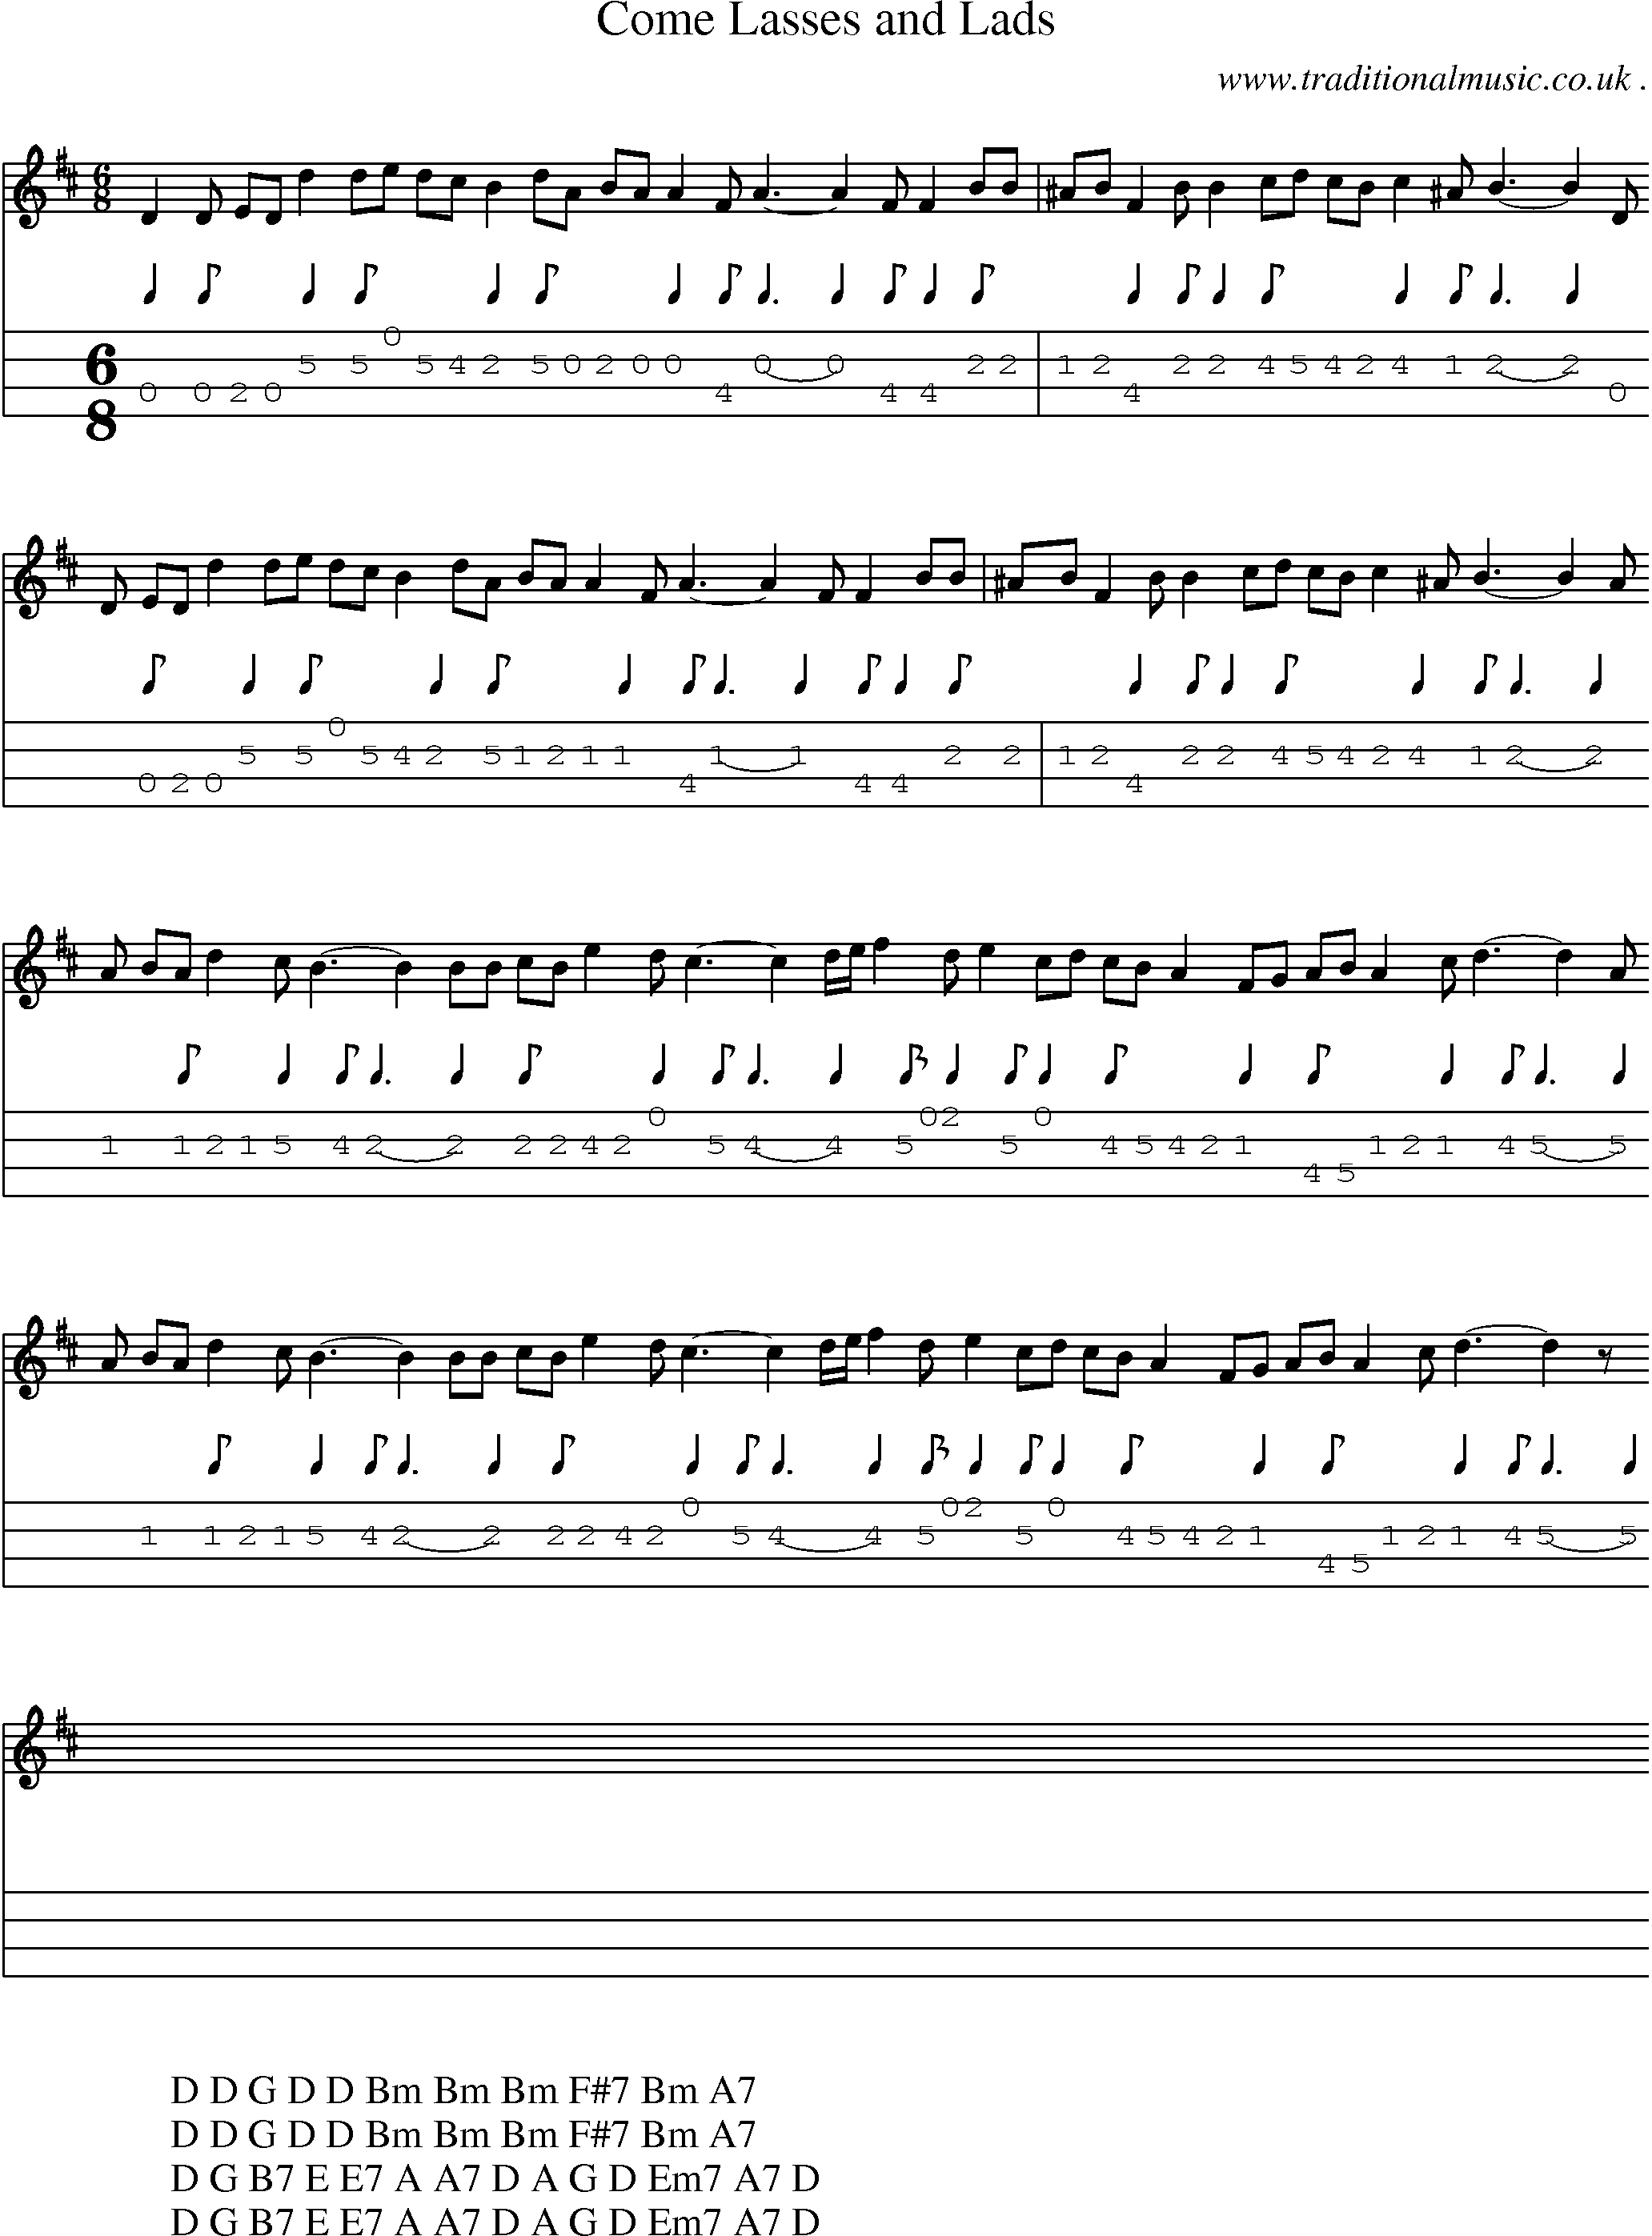 Sheet-music  score, Chords and Mandolin Tabs for Come Lasses And Lads